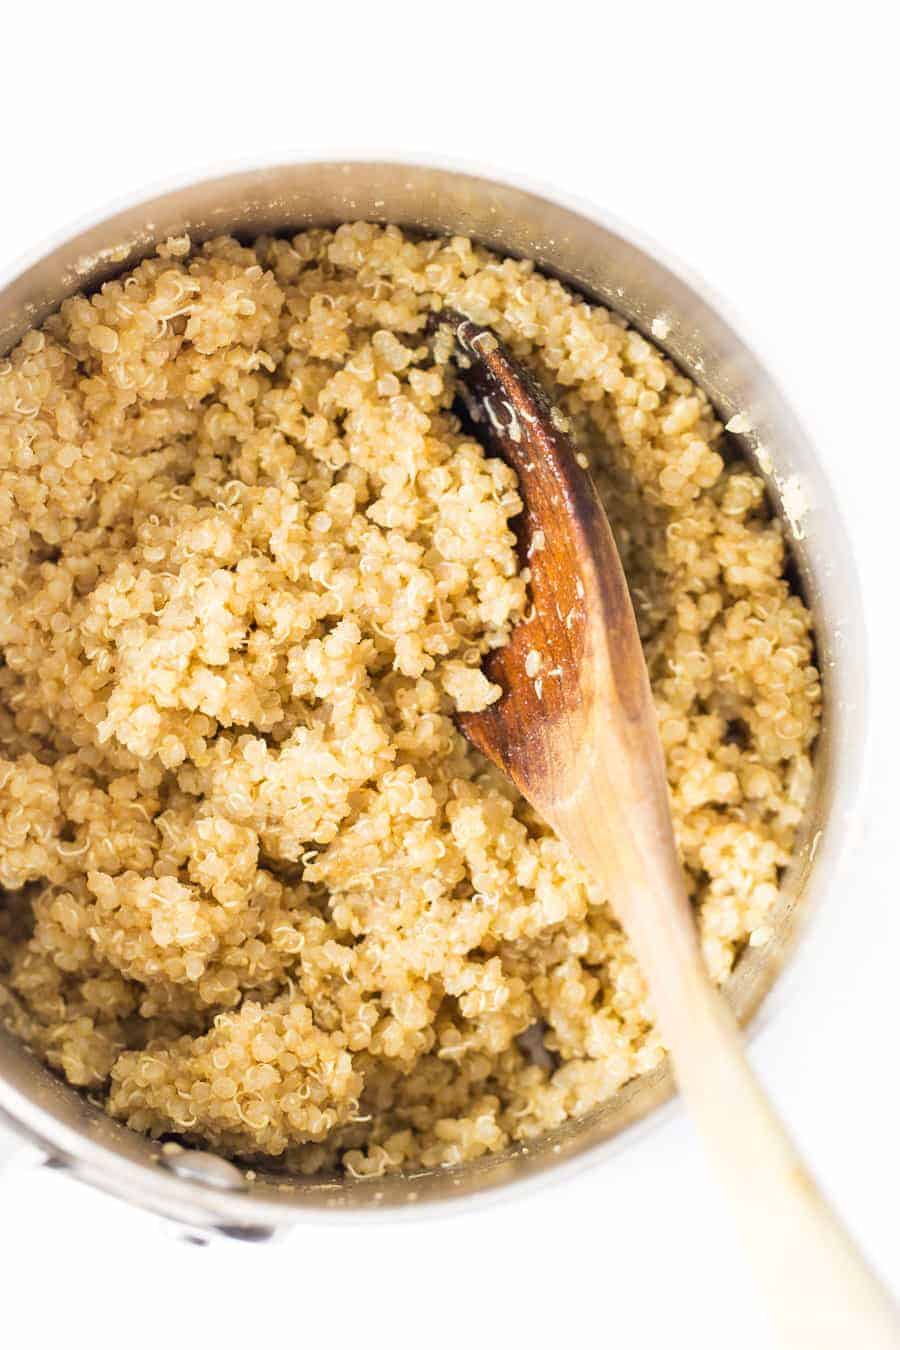 10 Essential Spices for More Flavorful Cooking - Simply Quinoa